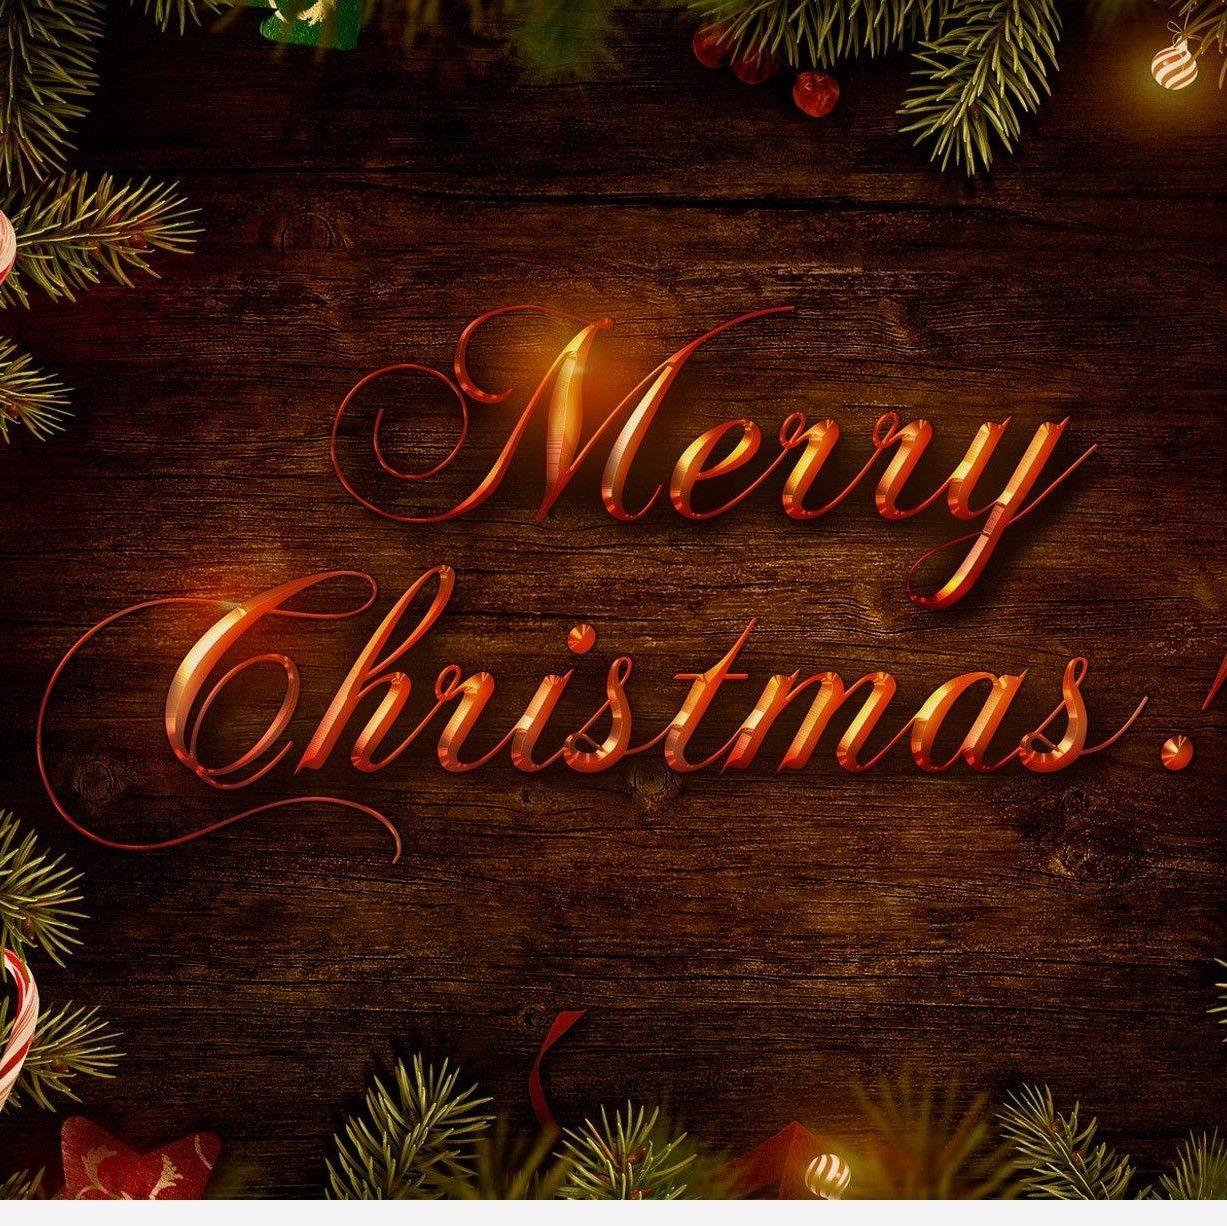 Wish You A Merry Christmas to All